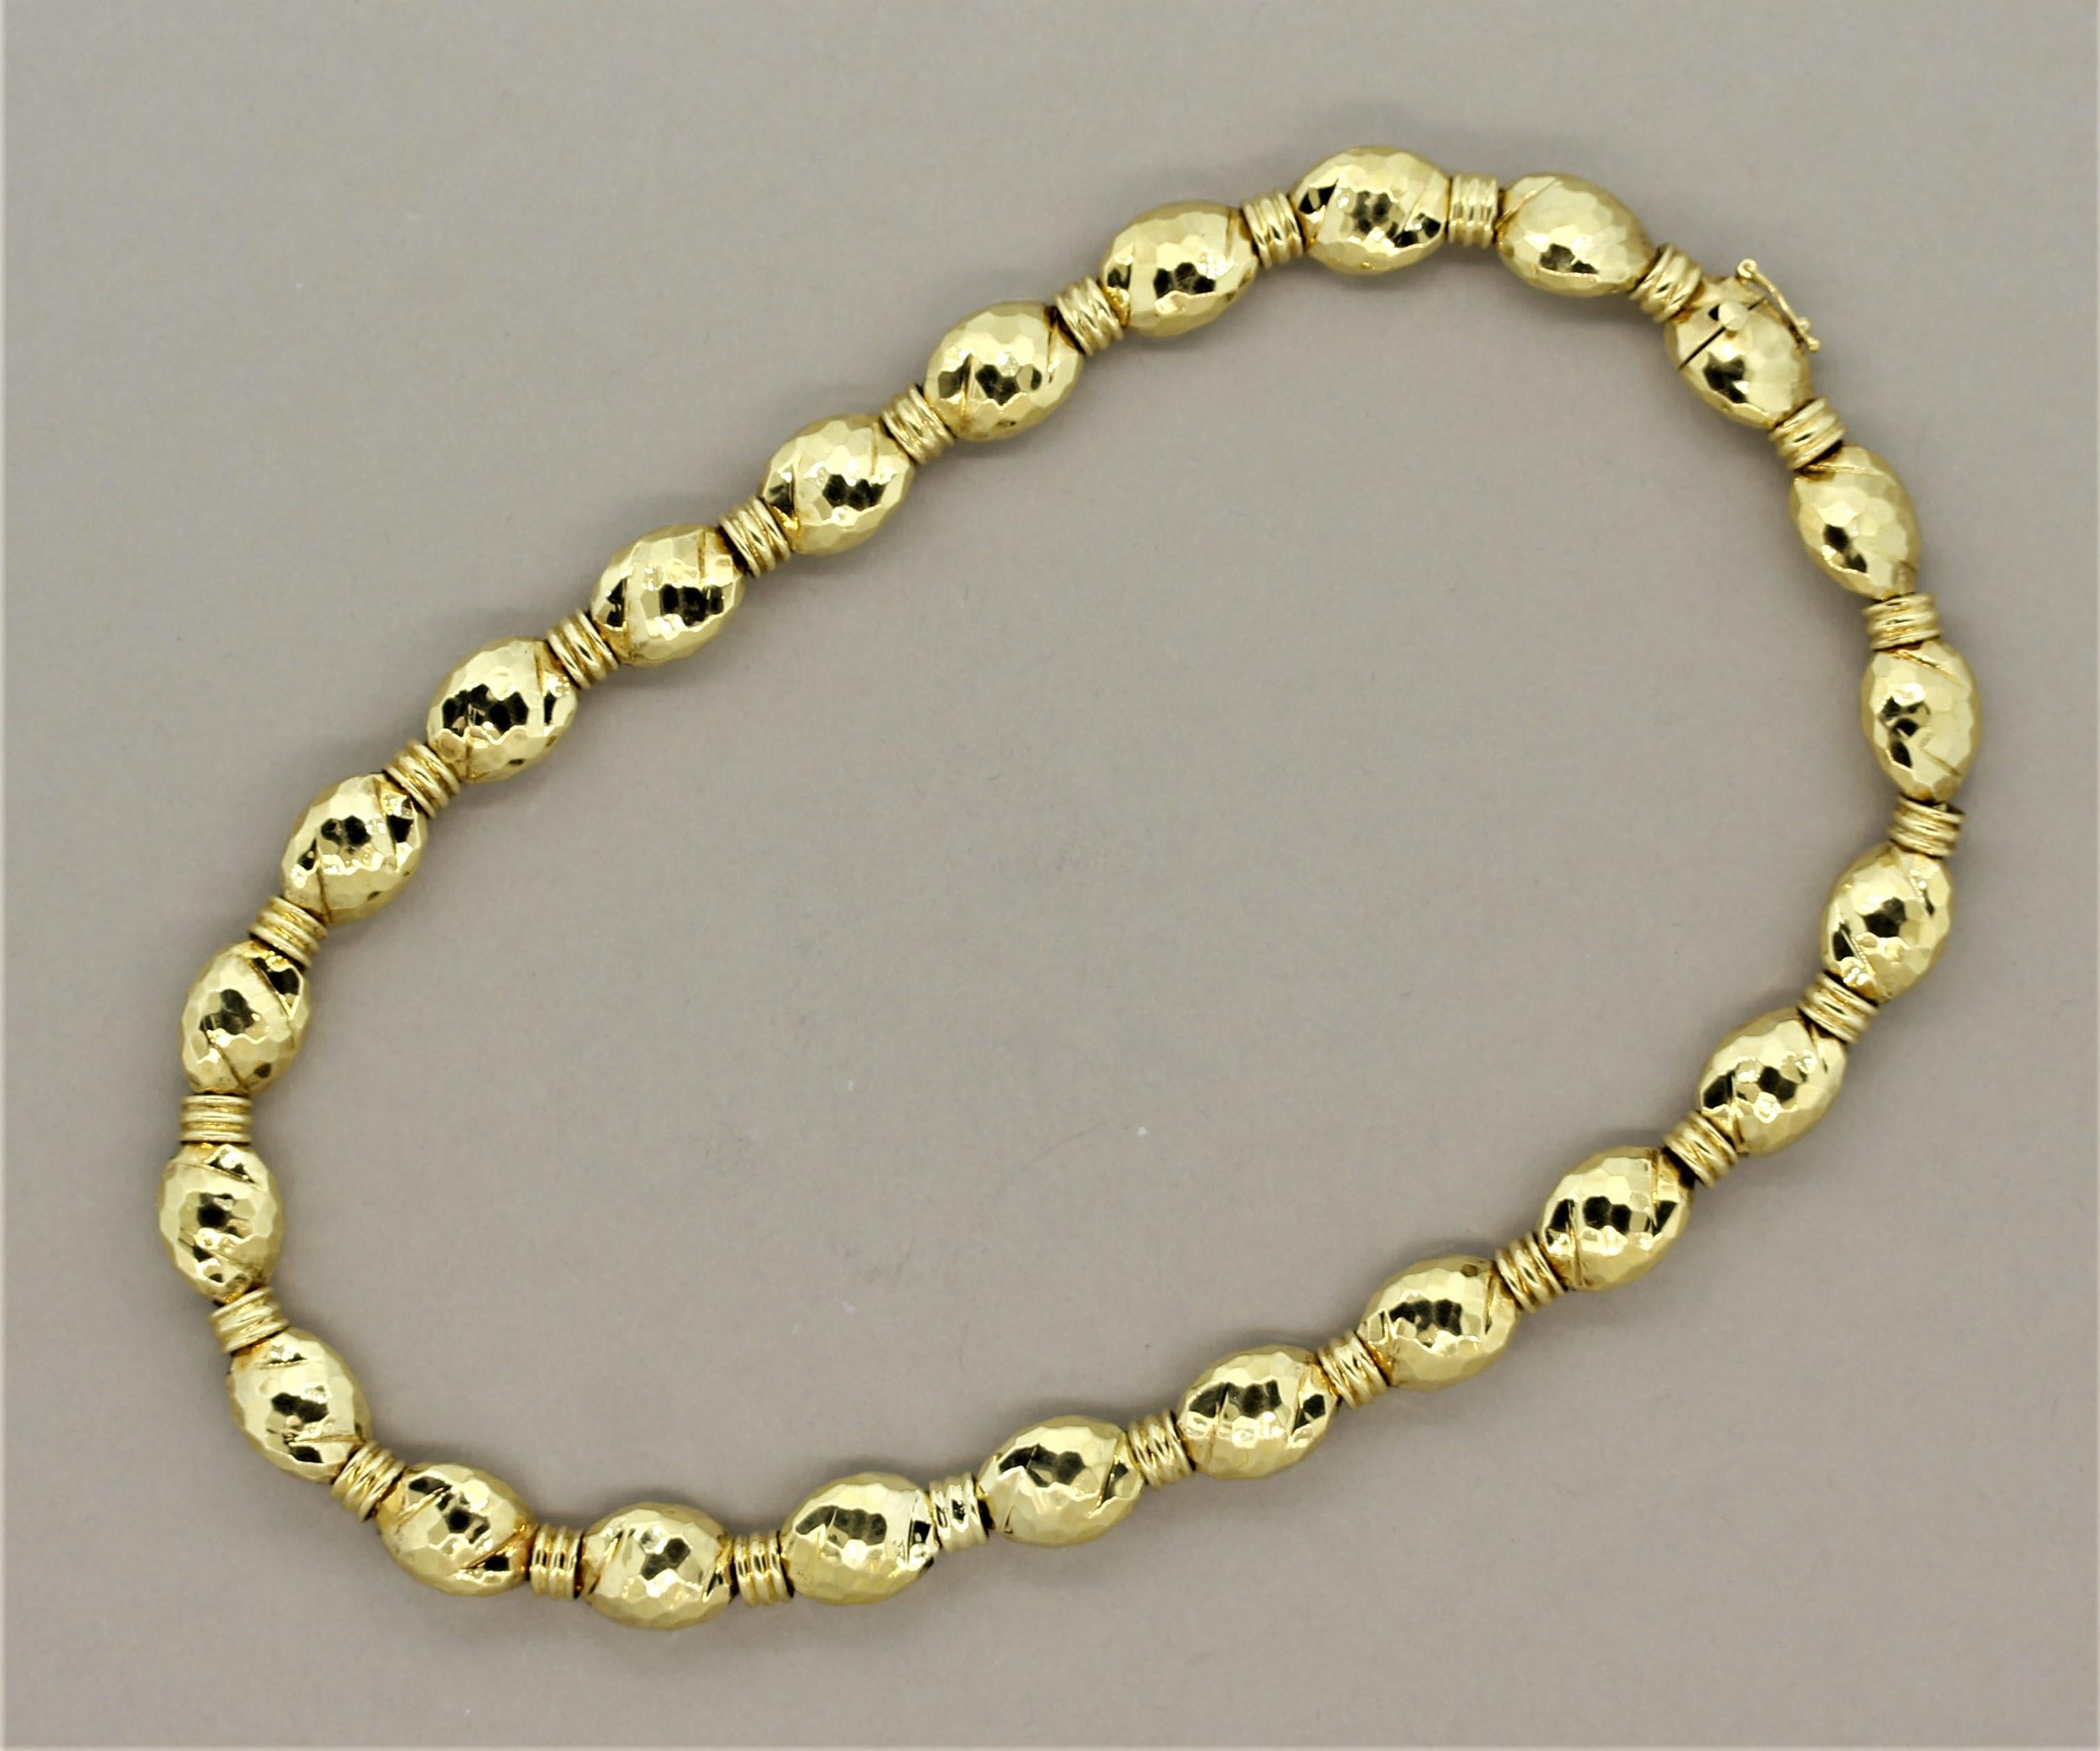 A classic piece by designer Henry Dunay featuring their renowned gold-work. This 18k yellow gold necklace way hand worked to form faceted gold beads with a high polish. Signed with the original makers-mark “Dunay” and “18k.”

Length: 16 inches